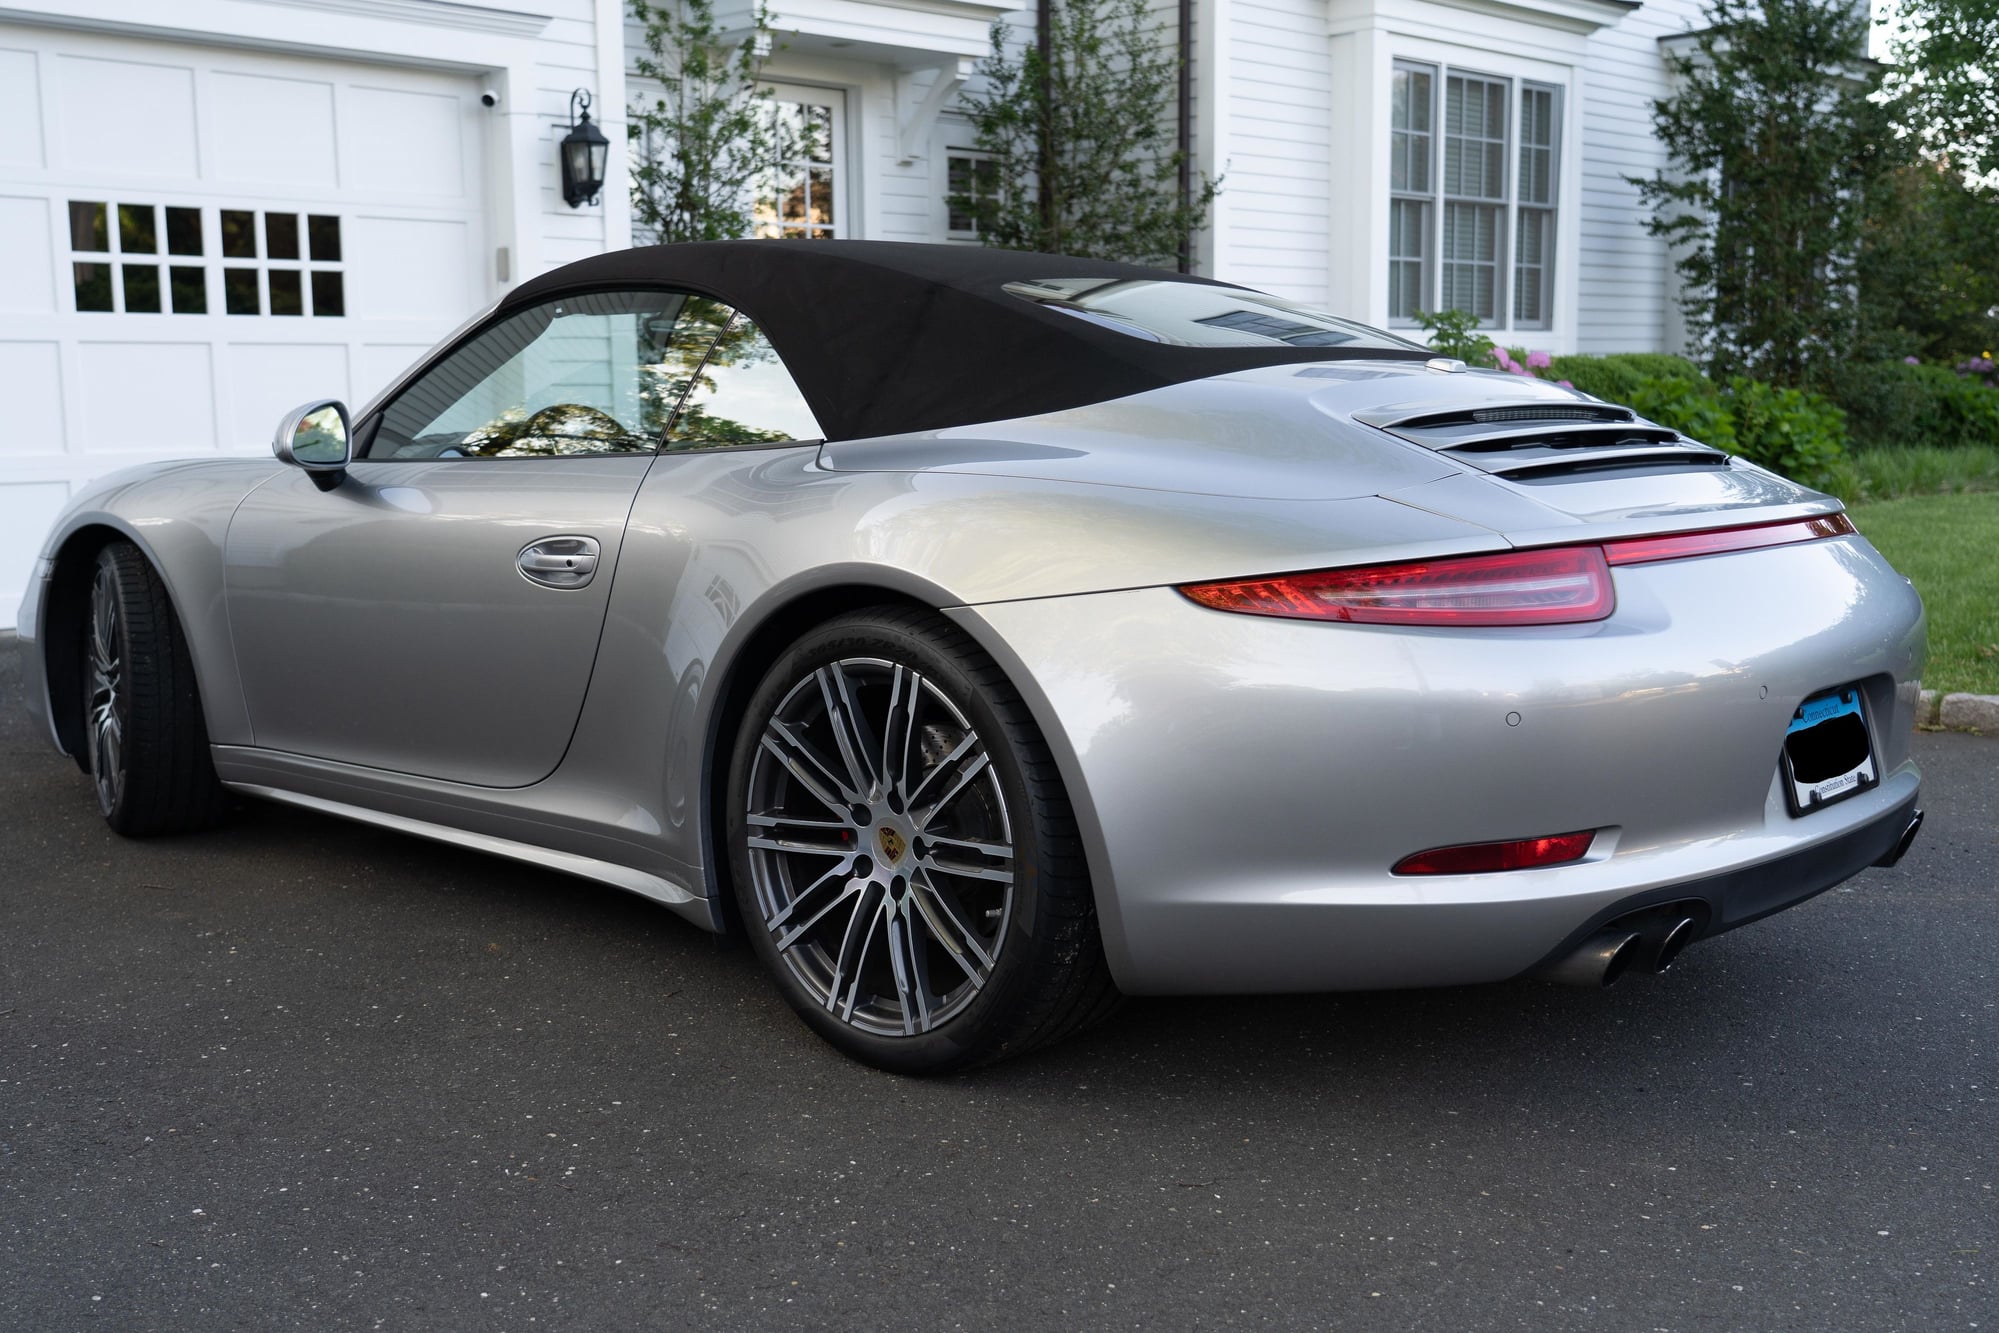 2015 Porsche 911 - 2015 911 Carerra 4S Cabriolet - Used - VIN WP0CB2A95FS154765 - 24,802 Miles - 3 cyl - 2WD - Automatic - Convertible - Silver - New Canaan, CT 06840, United States